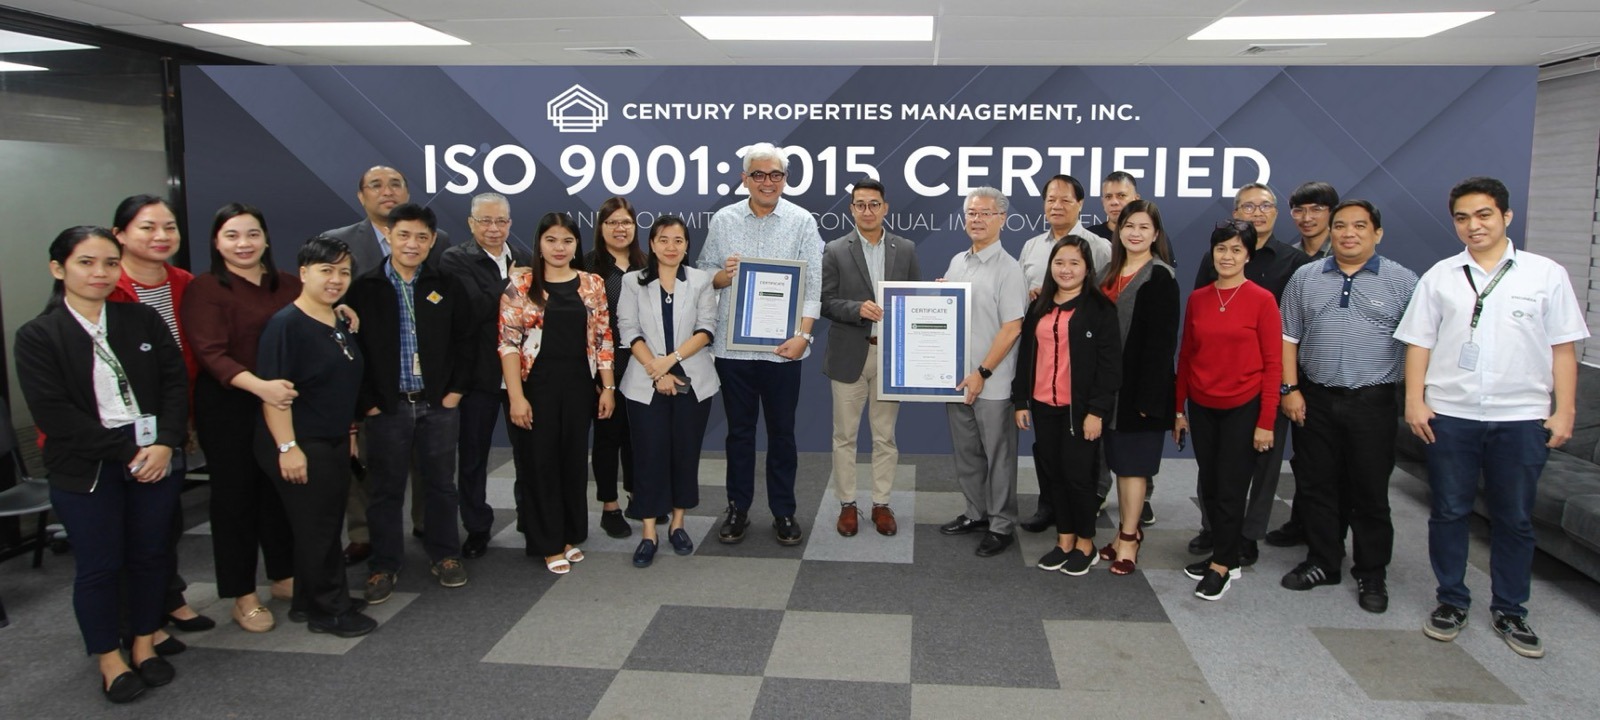 Century Properties Management Awarded World’s Most Recognized Quality Management System Standard